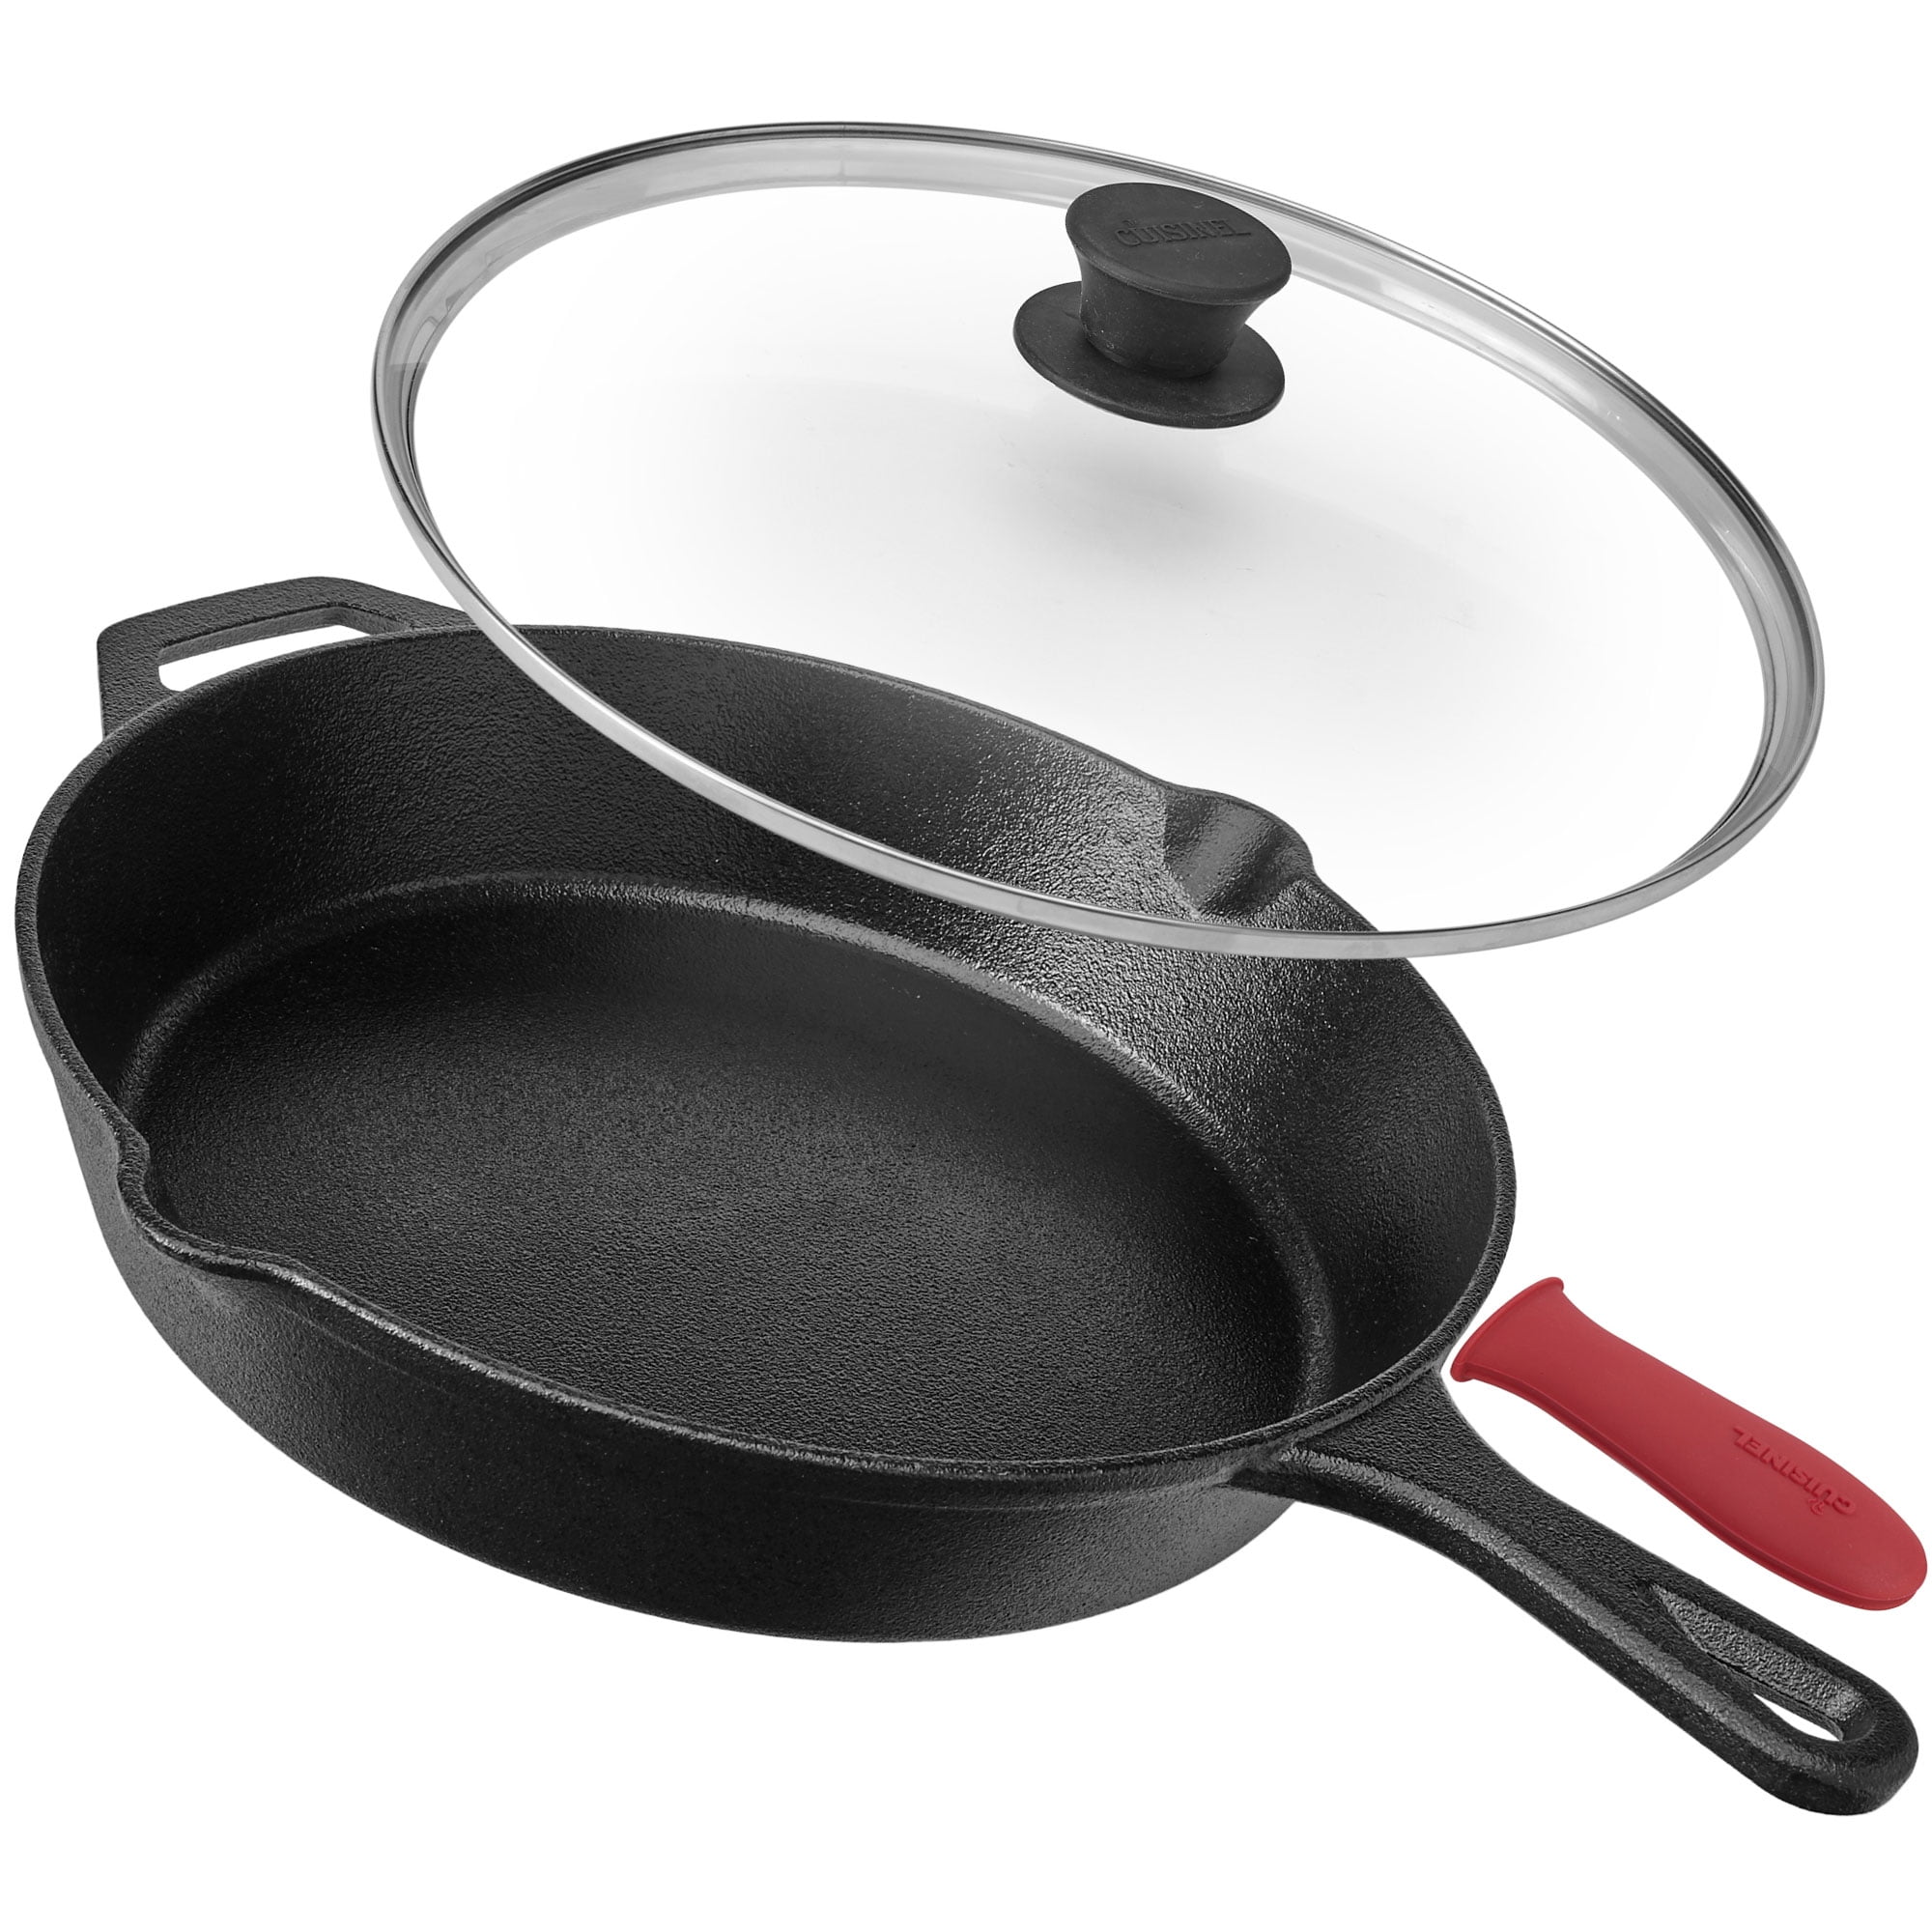 Stove Top and Induction Safe Grill 30.48cm Frying Pans Indoor/Outdoor 8+12-inch / 20.32cm Glass Lids Cast Iron Skillet Set 2 Silicone Handle Covers Pre-Seasoned Oven Safe Cookware